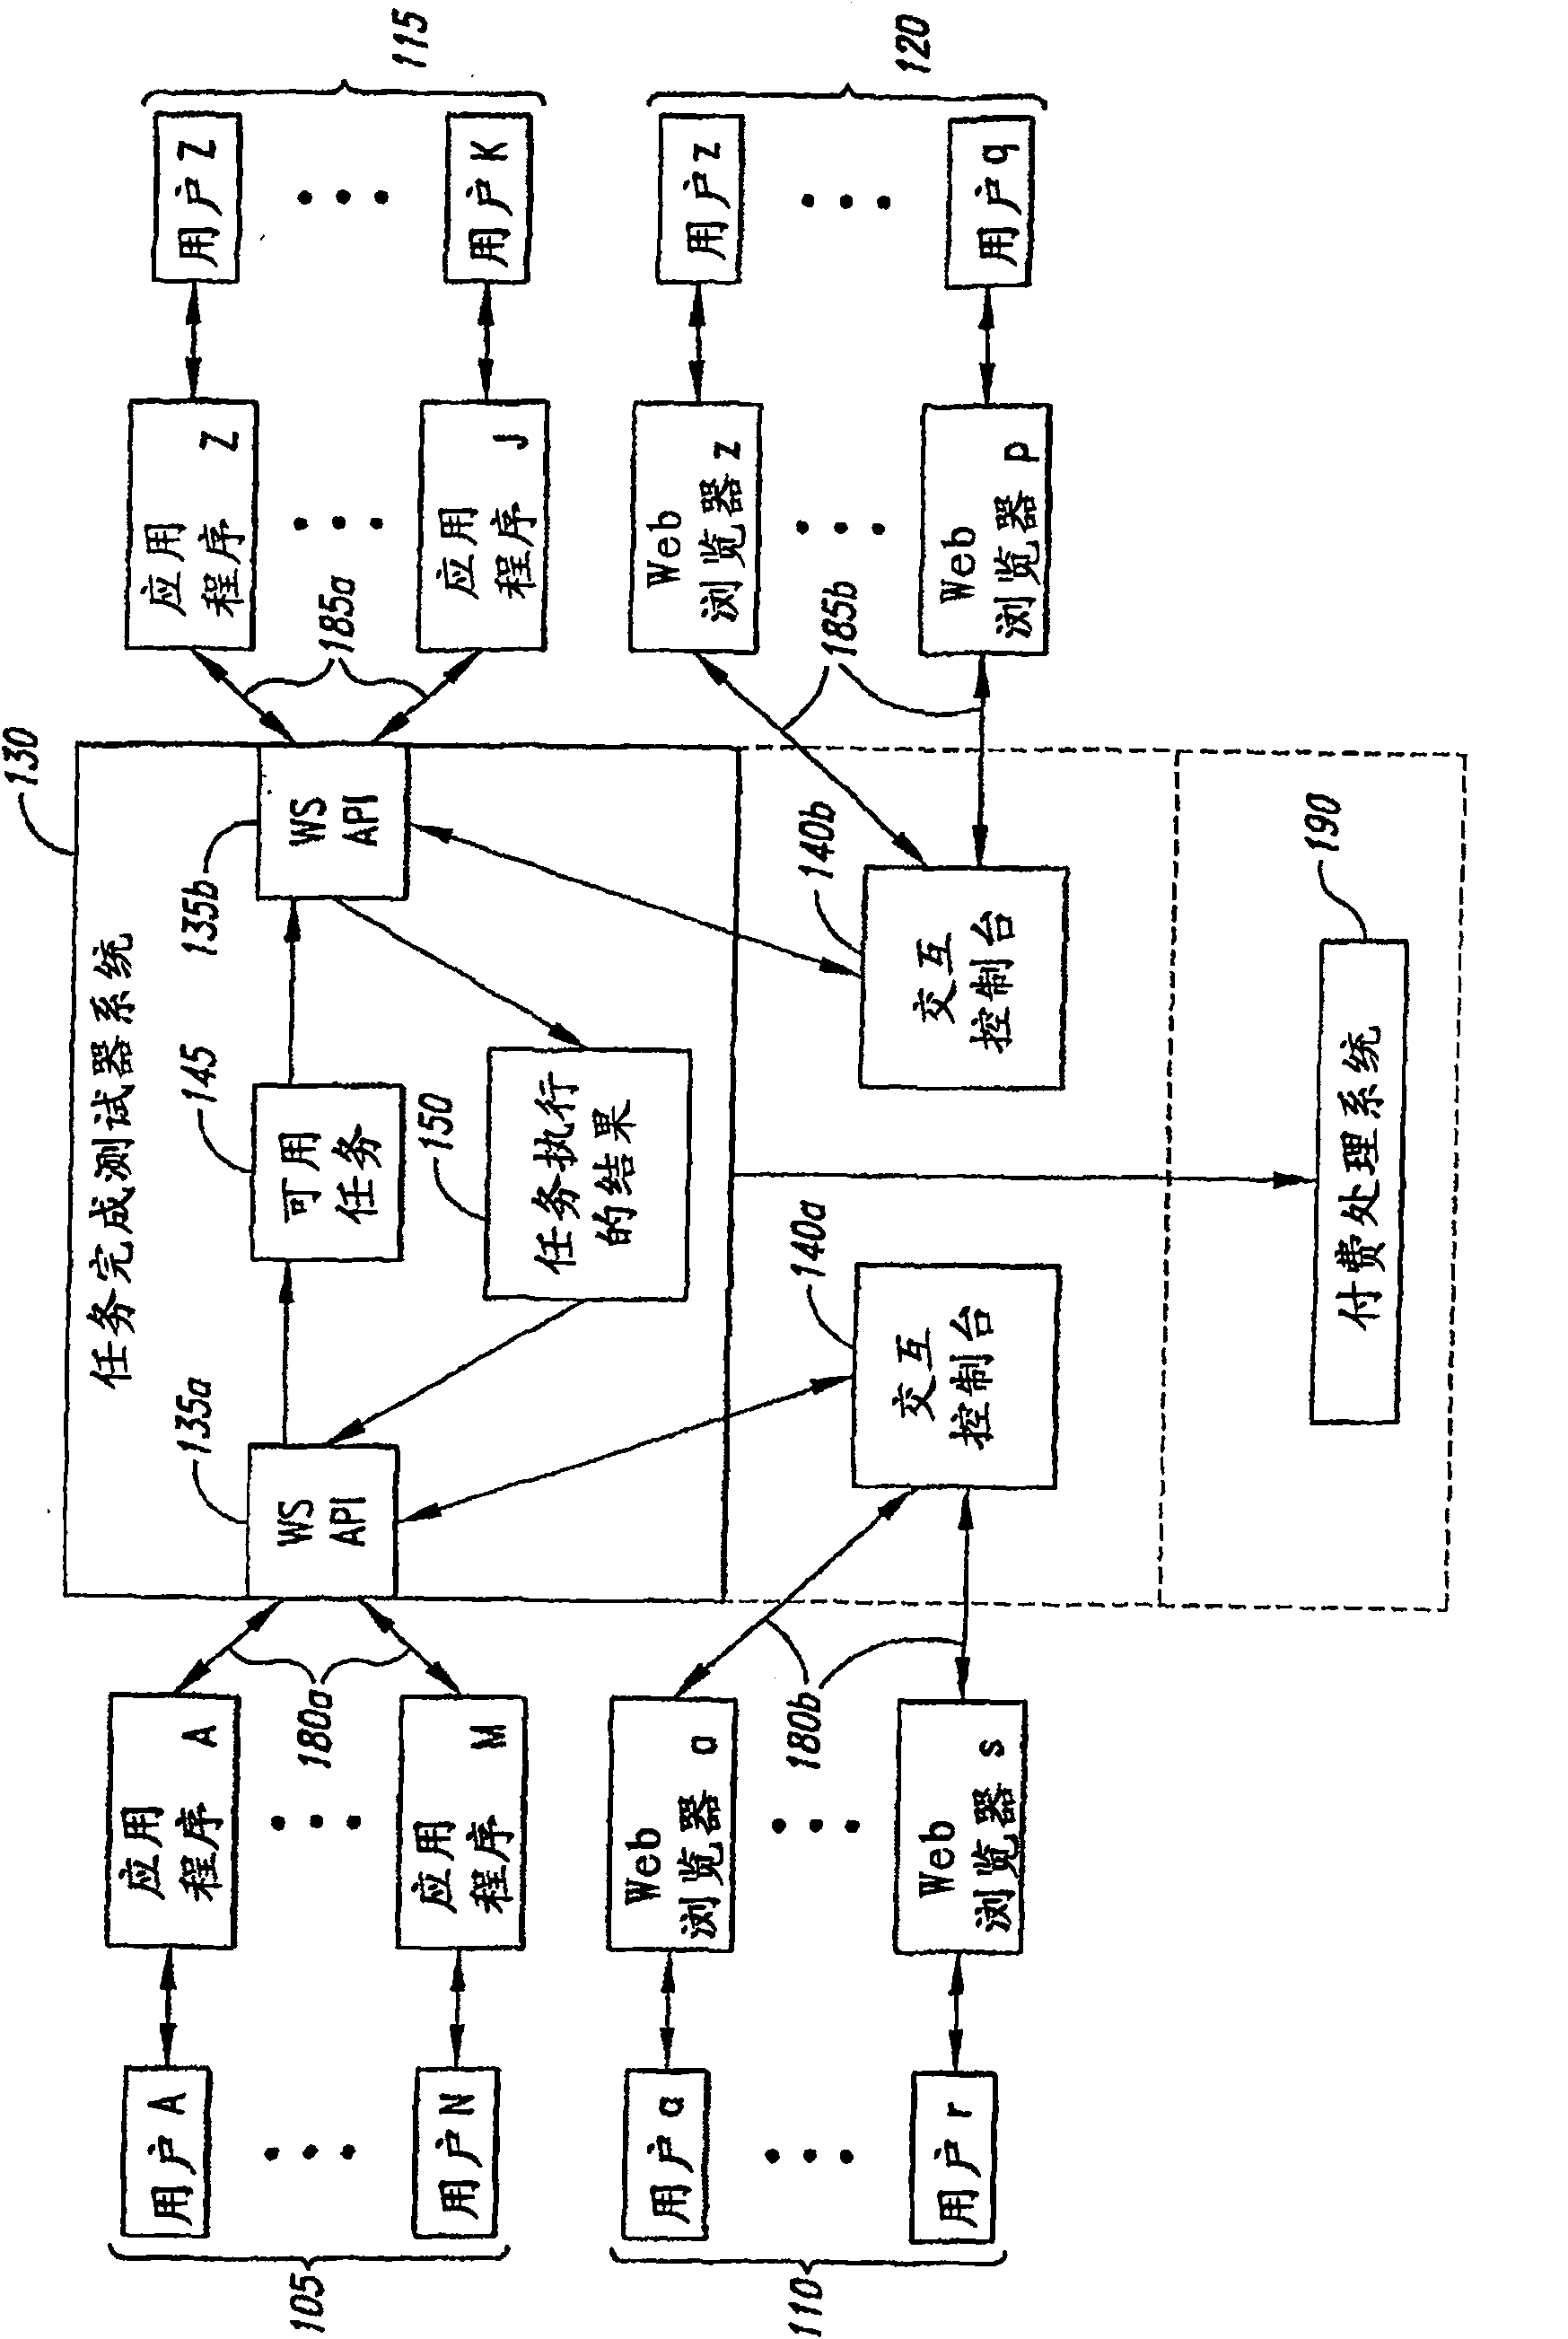 Computer implementing method for providing an electronic intermediate platform